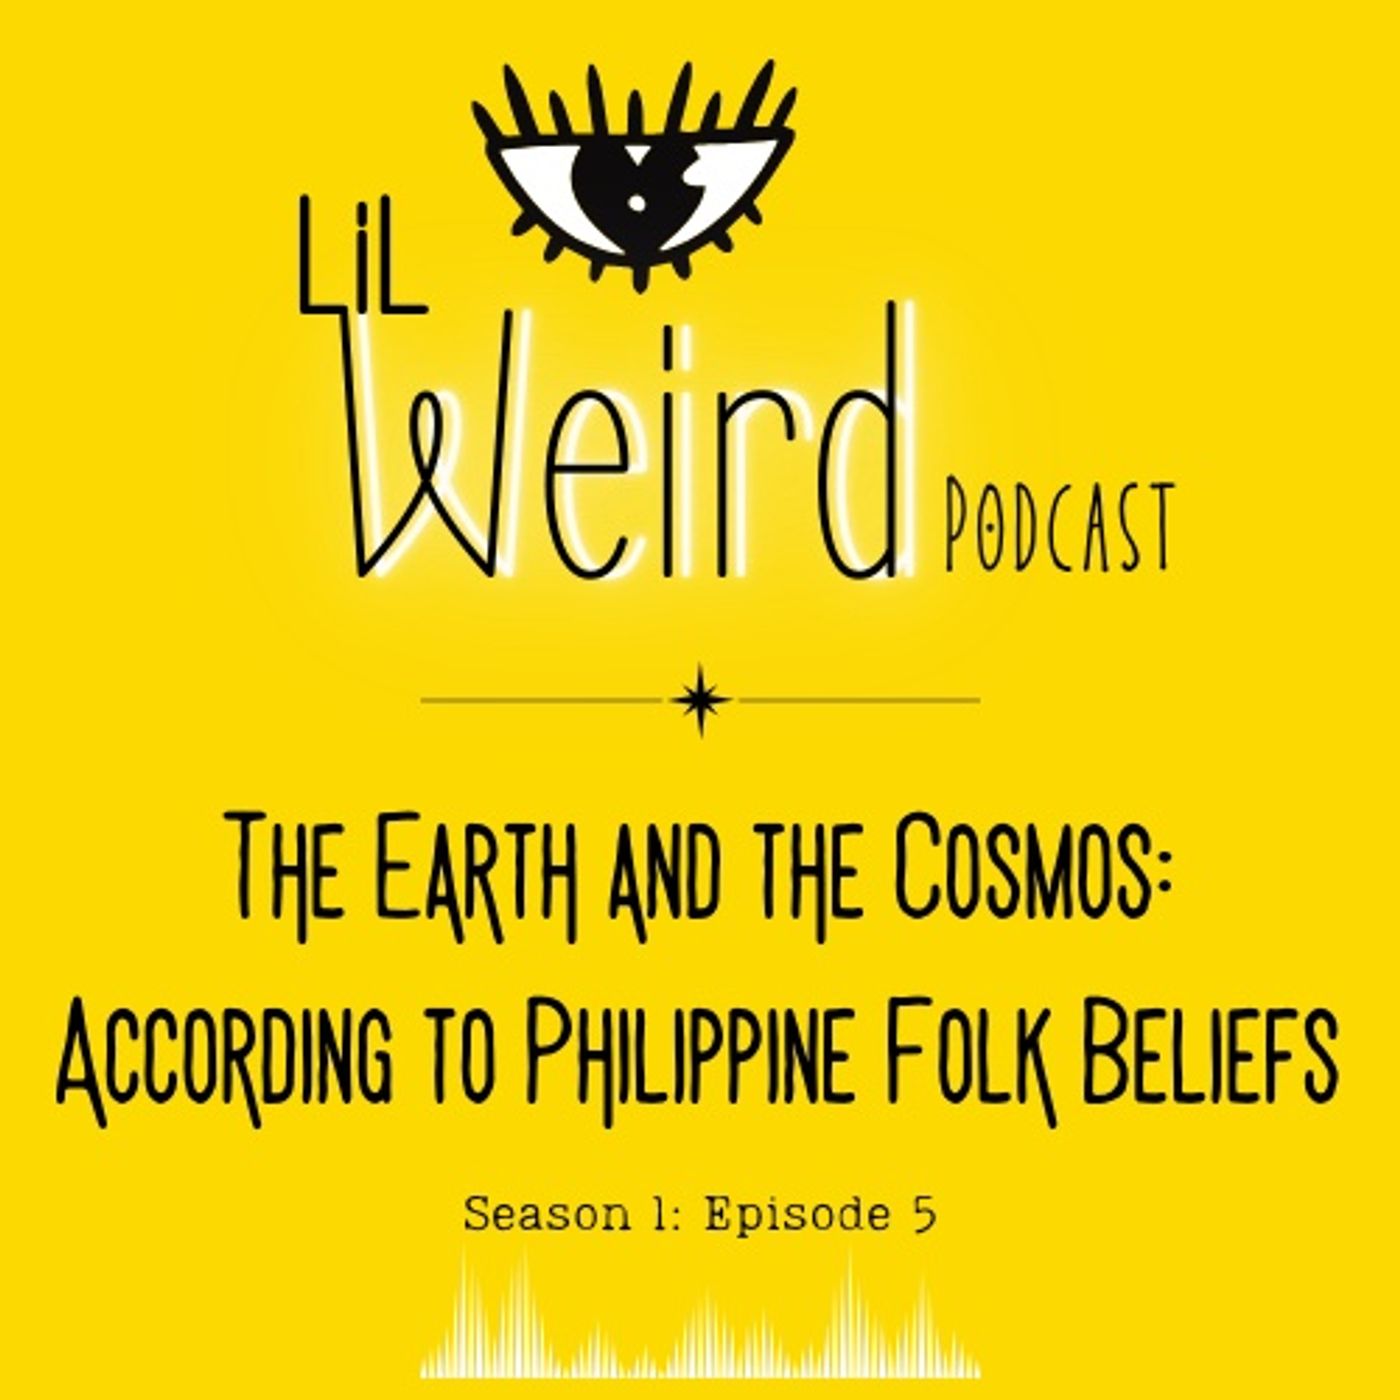 The Earth and the Cosmos: According to Philippine Folk Beliefs